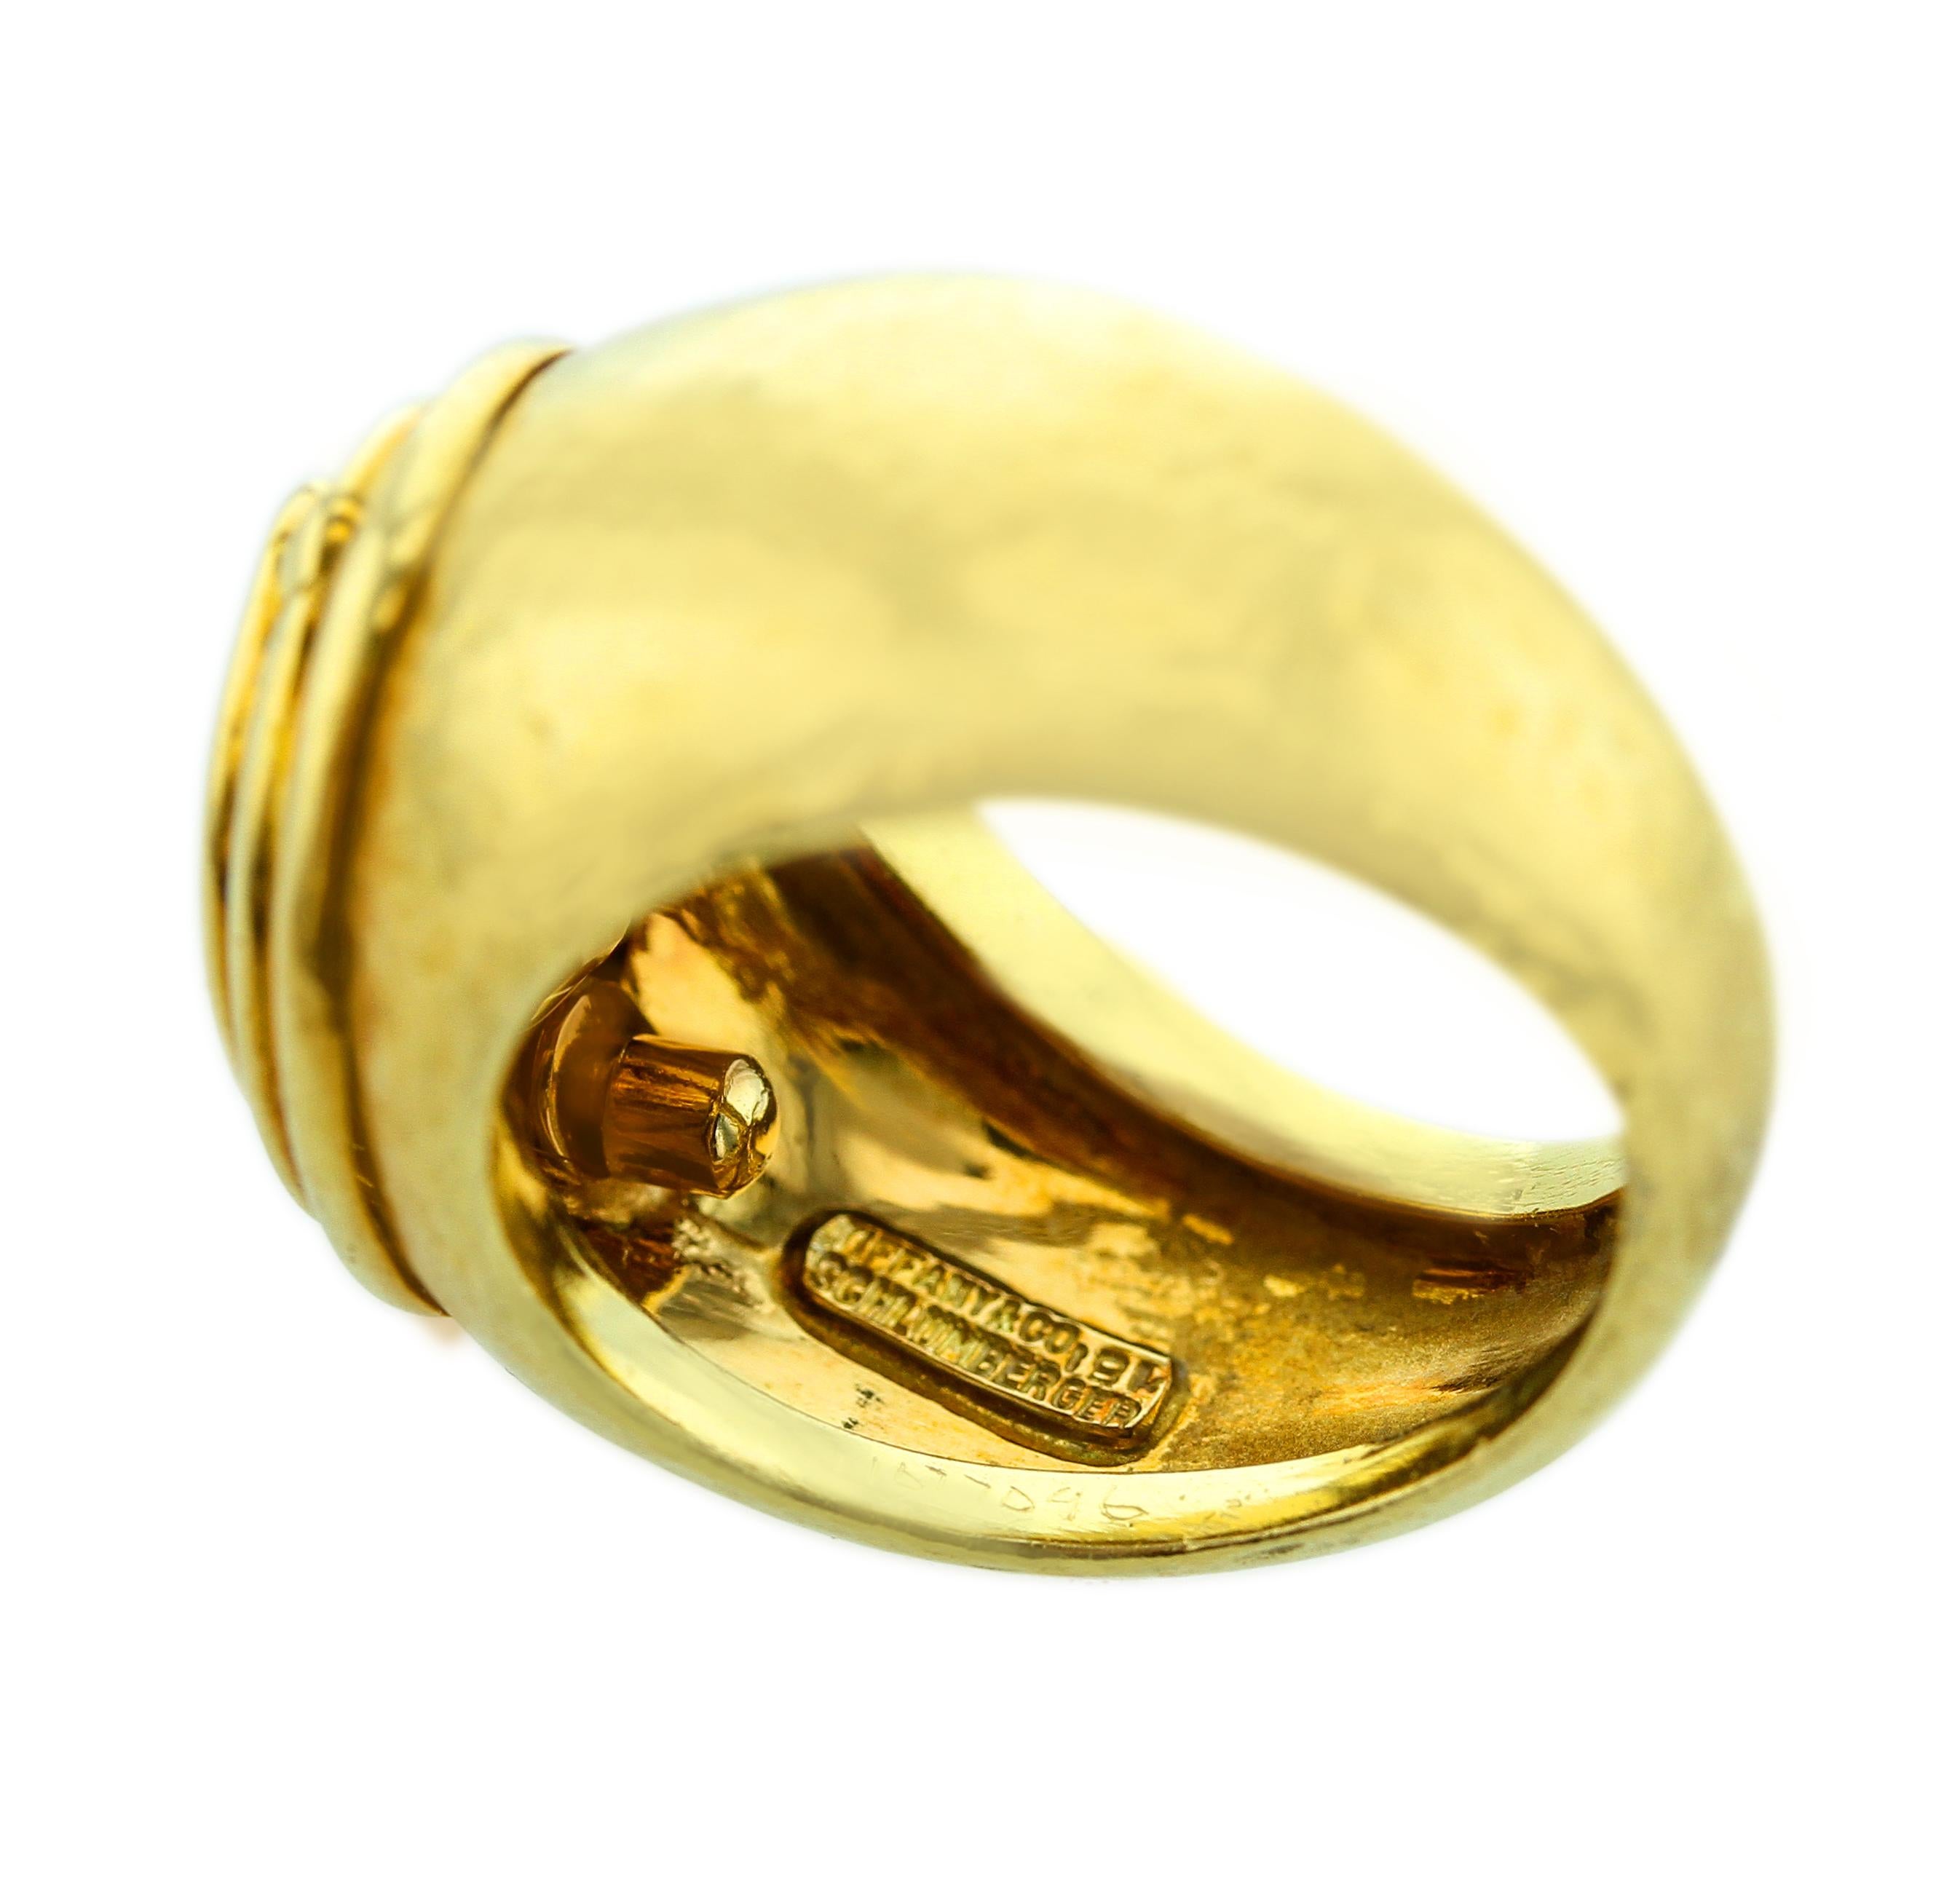 An oval citrine (measuring appx. 9.15 x 6.90 x 5.92 mm) enclosed in a hammered gold ring, signed Tiffany & Co. Schlumberger, 18K Yellow Gold. Size US 5.75.